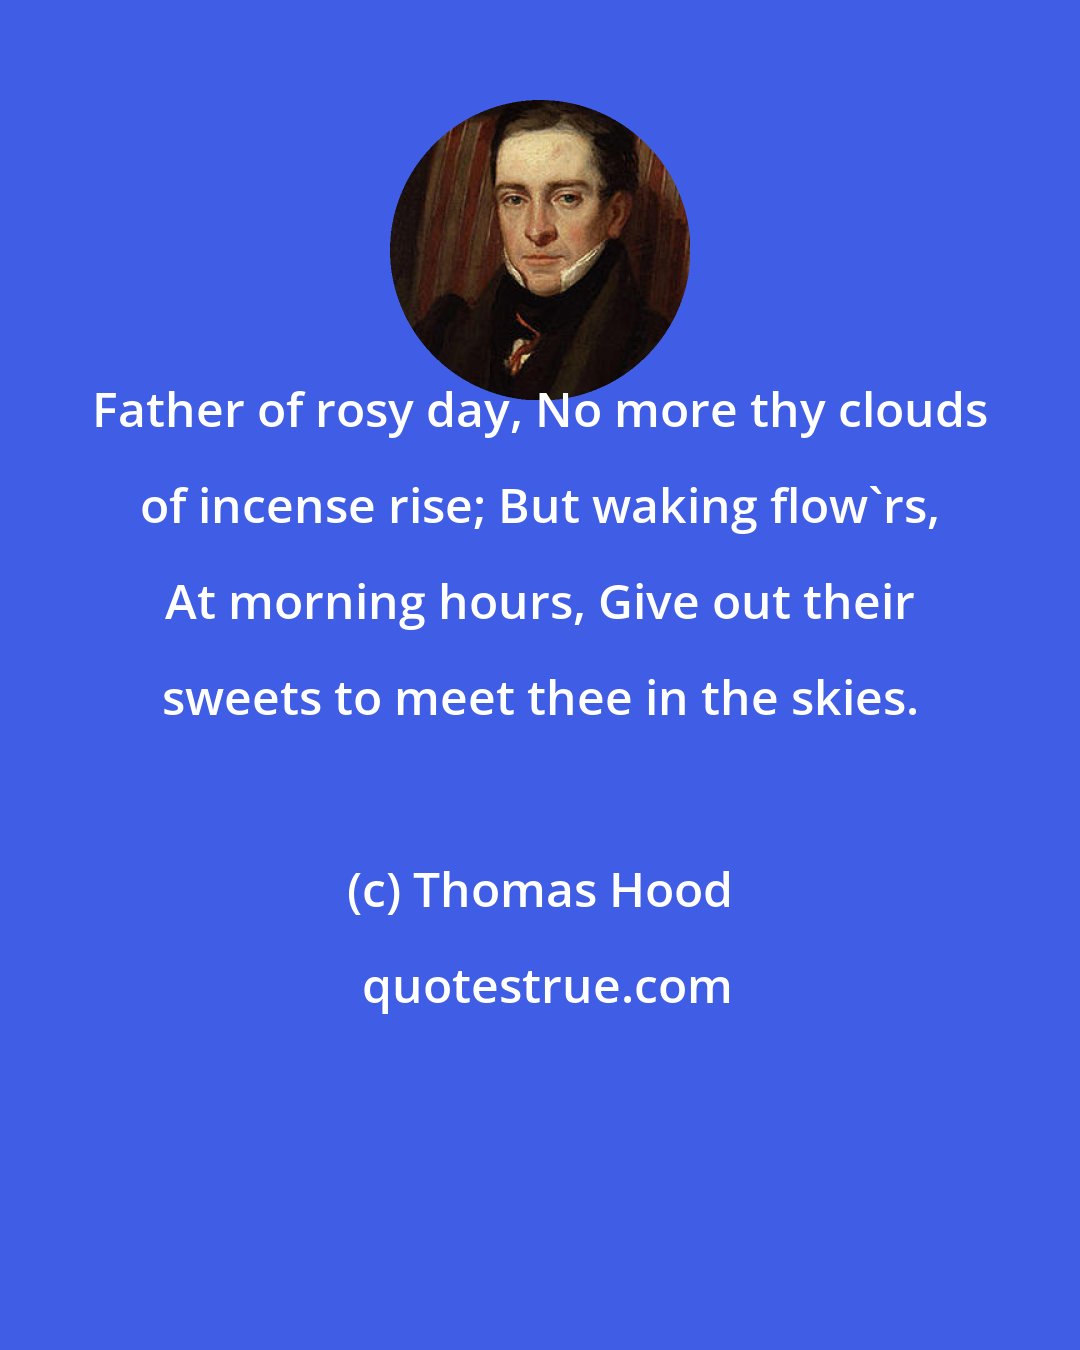 Thomas Hood: Father of rosy day, No more thy clouds of incense rise; But waking flow'rs, At morning hours, Give out their sweets to meet thee in the skies.